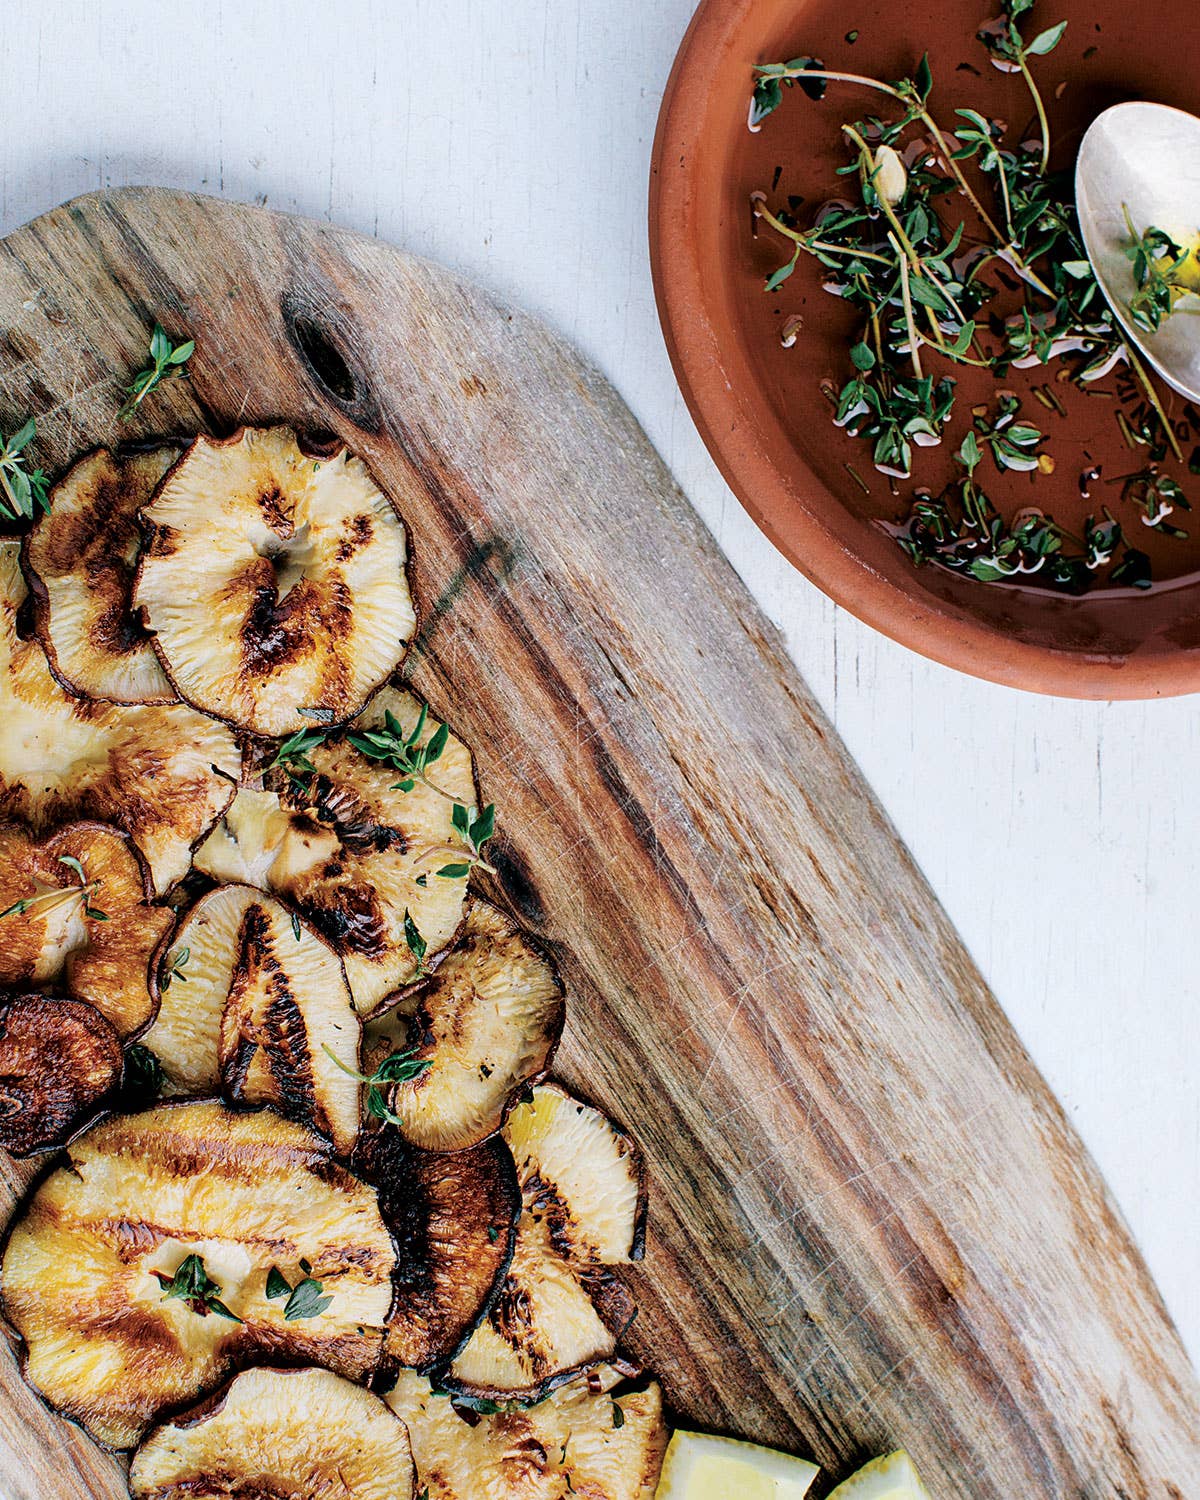 Grilled Shiitake Mushroom with Chile and Thyme